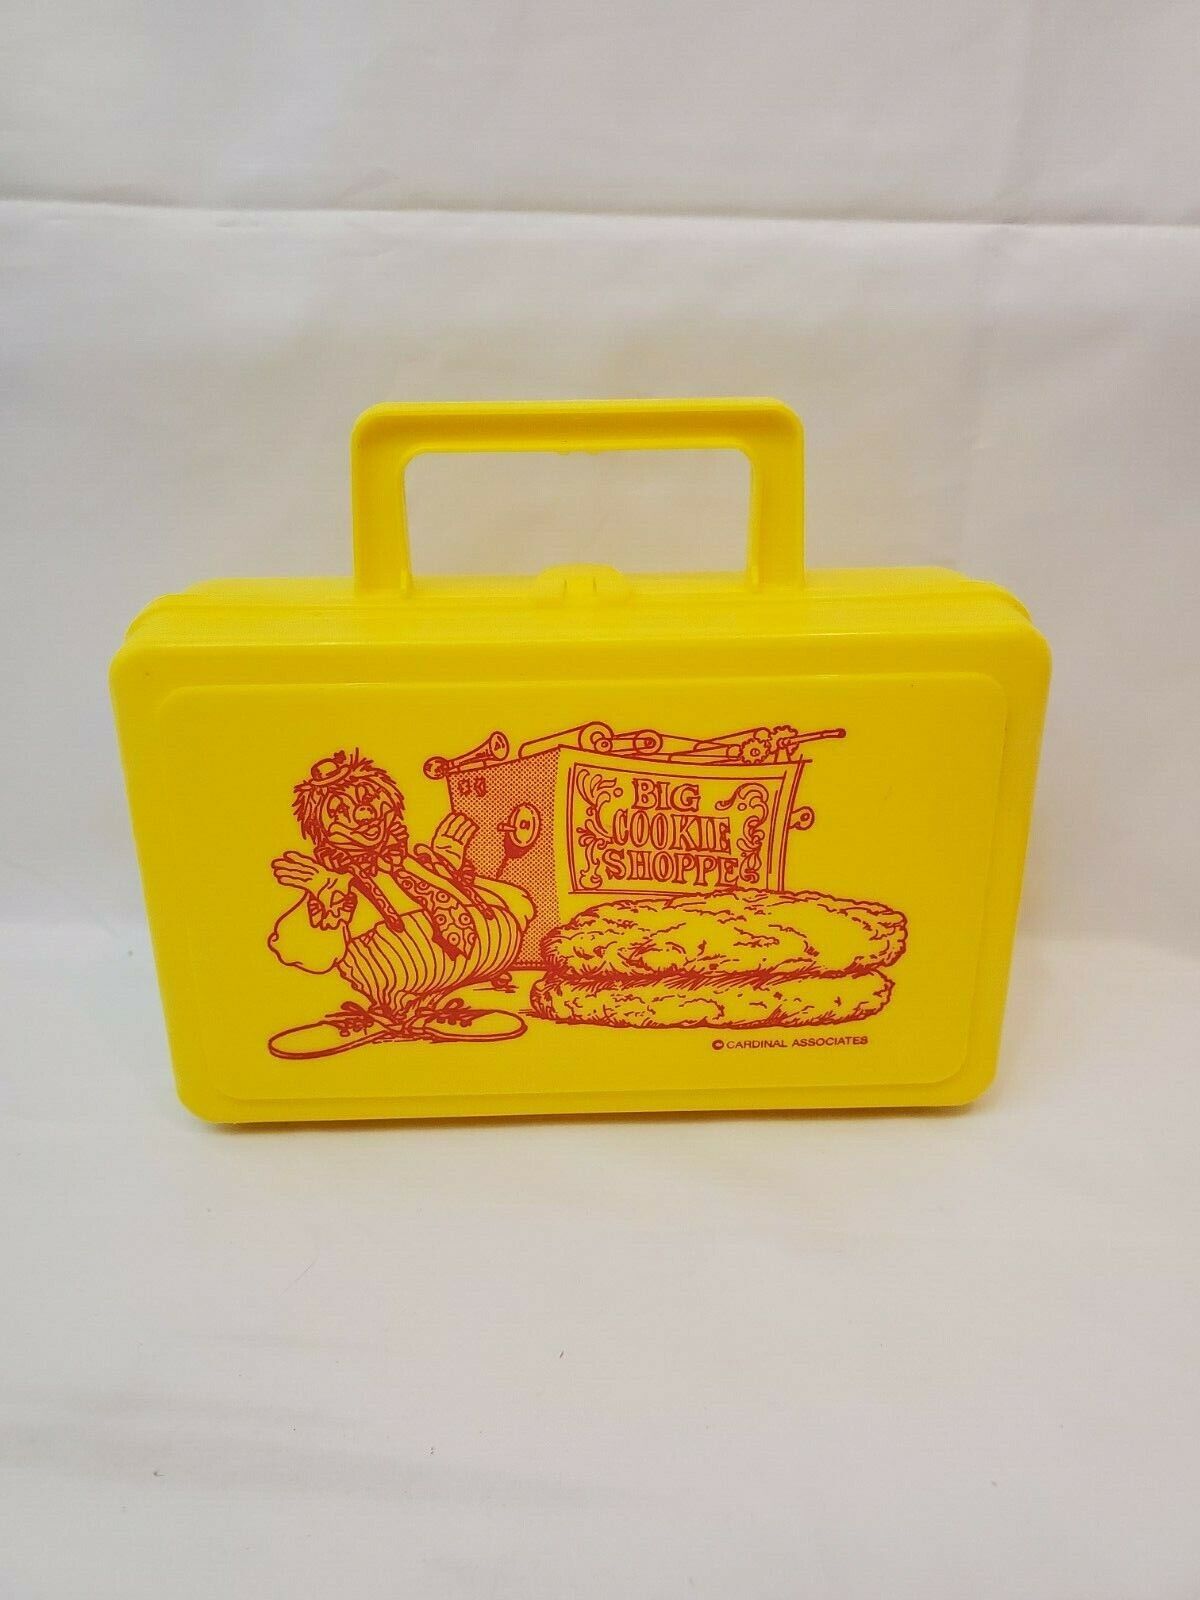 Vintage 8X5" Plastic Lunch Box Big Cookie Shoppe Whirley Industries Inc Yellow